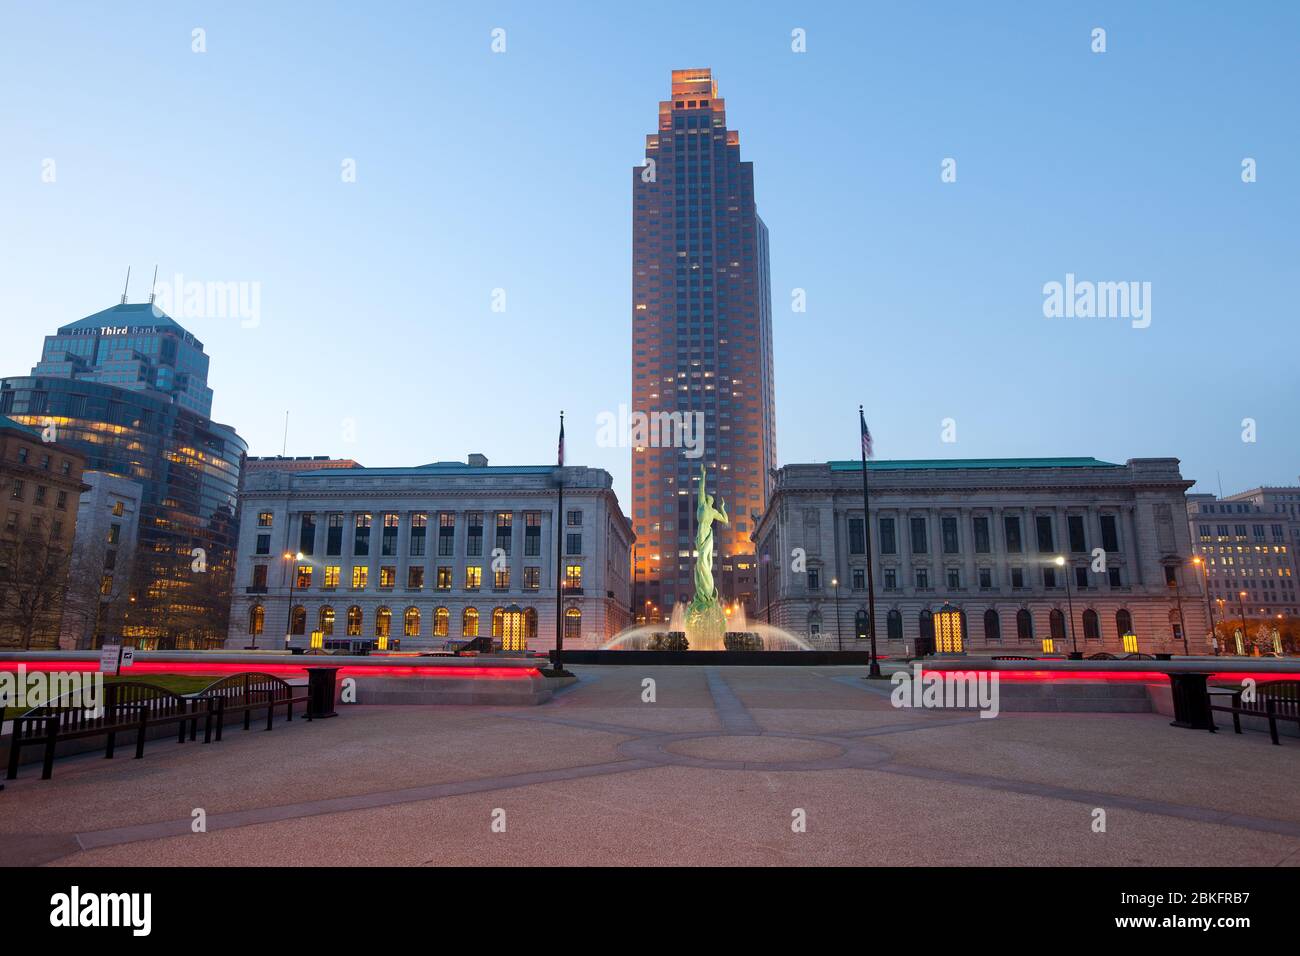 Cleveland, Ohio, United States - The Cleveland Mall Park and Fountain of Eternal Life, Stock Photo